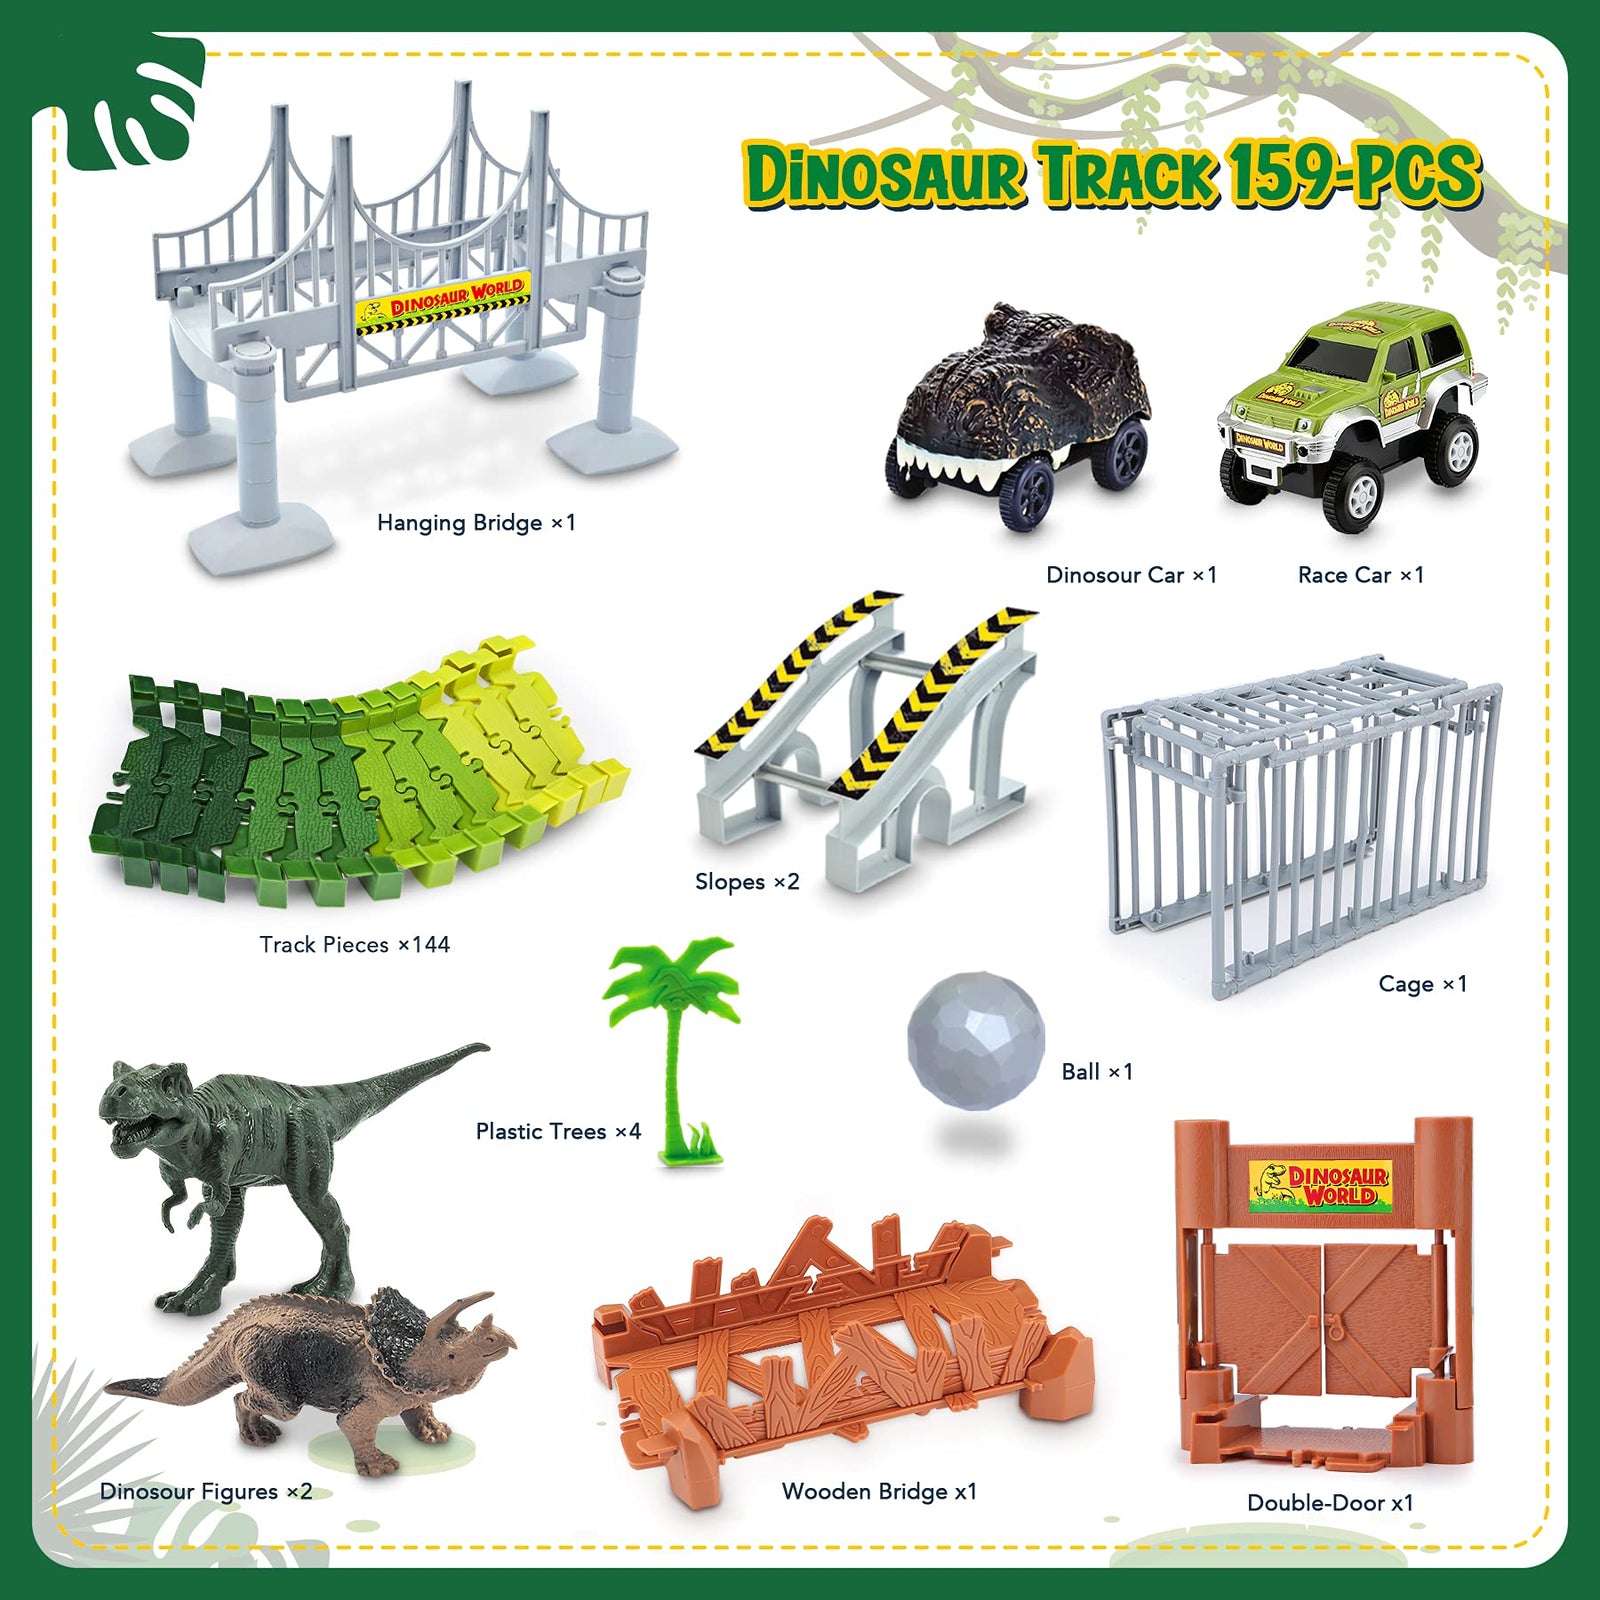 Hony Kids Dinosaur Race Car Track with Flexible Track,Dino Toys, Dinosaur Tracks, Dinosaur Car and Race Car Toys for Kids , Dinosaur Toys for Age 3 4 5 6 7 Year & Up Old boy Girls Birthday Gifts